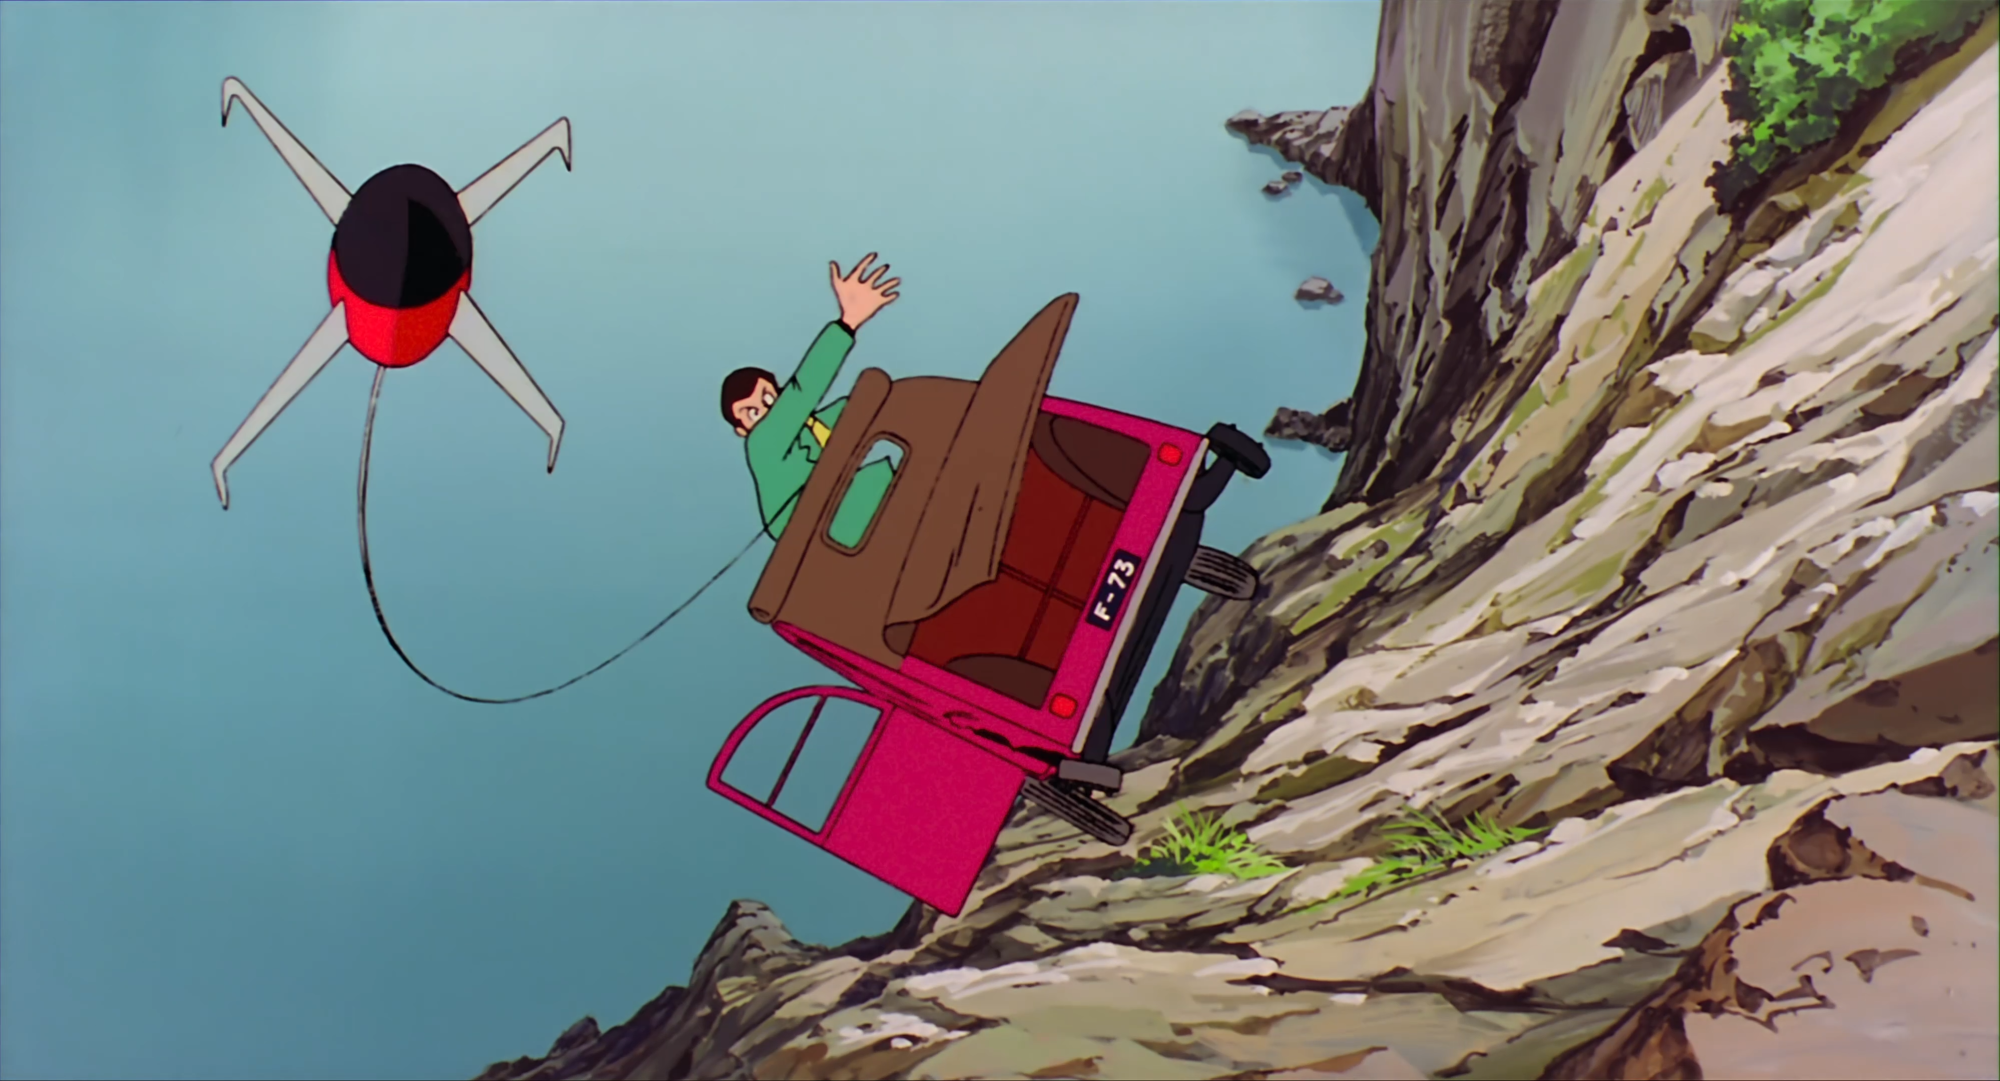 Lupin_Still_09.11.10.png